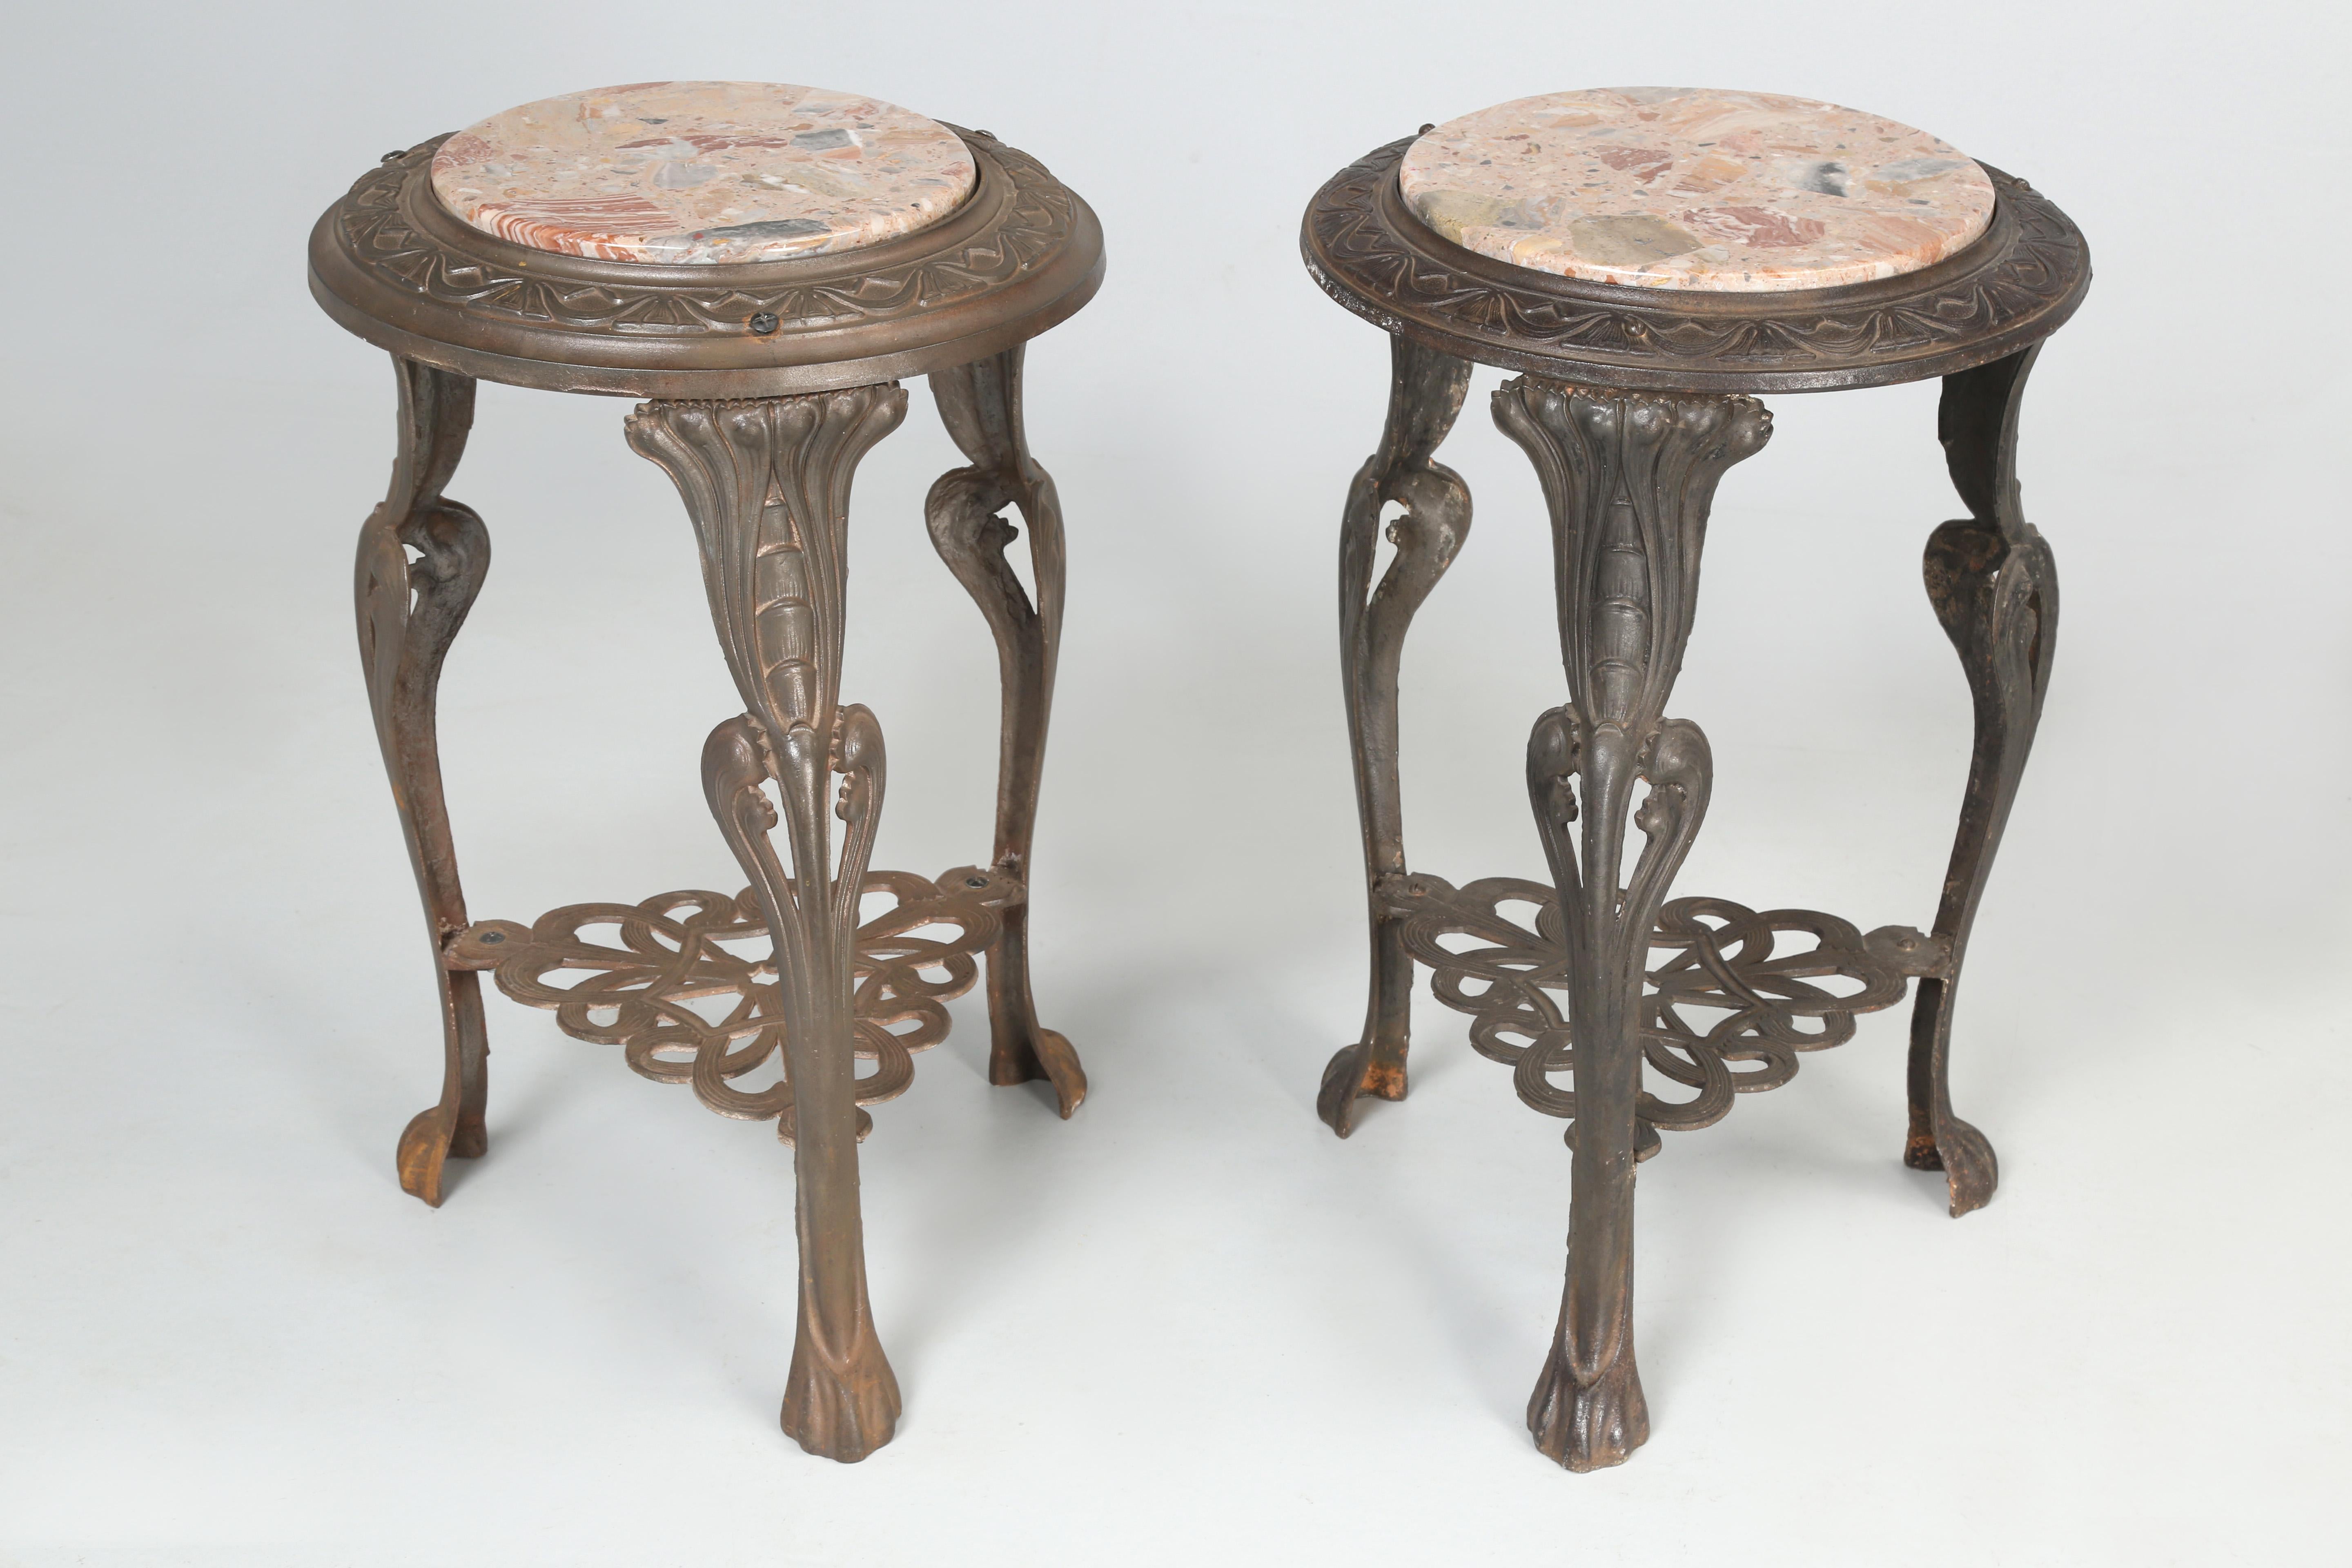 Guéridon is defined as a small table supported by one or more columns and often with a circular top in stone. The gueridon or pedestal table originated in France towards the mid-17th century. Often, they were used to hold a vase or candlestick,